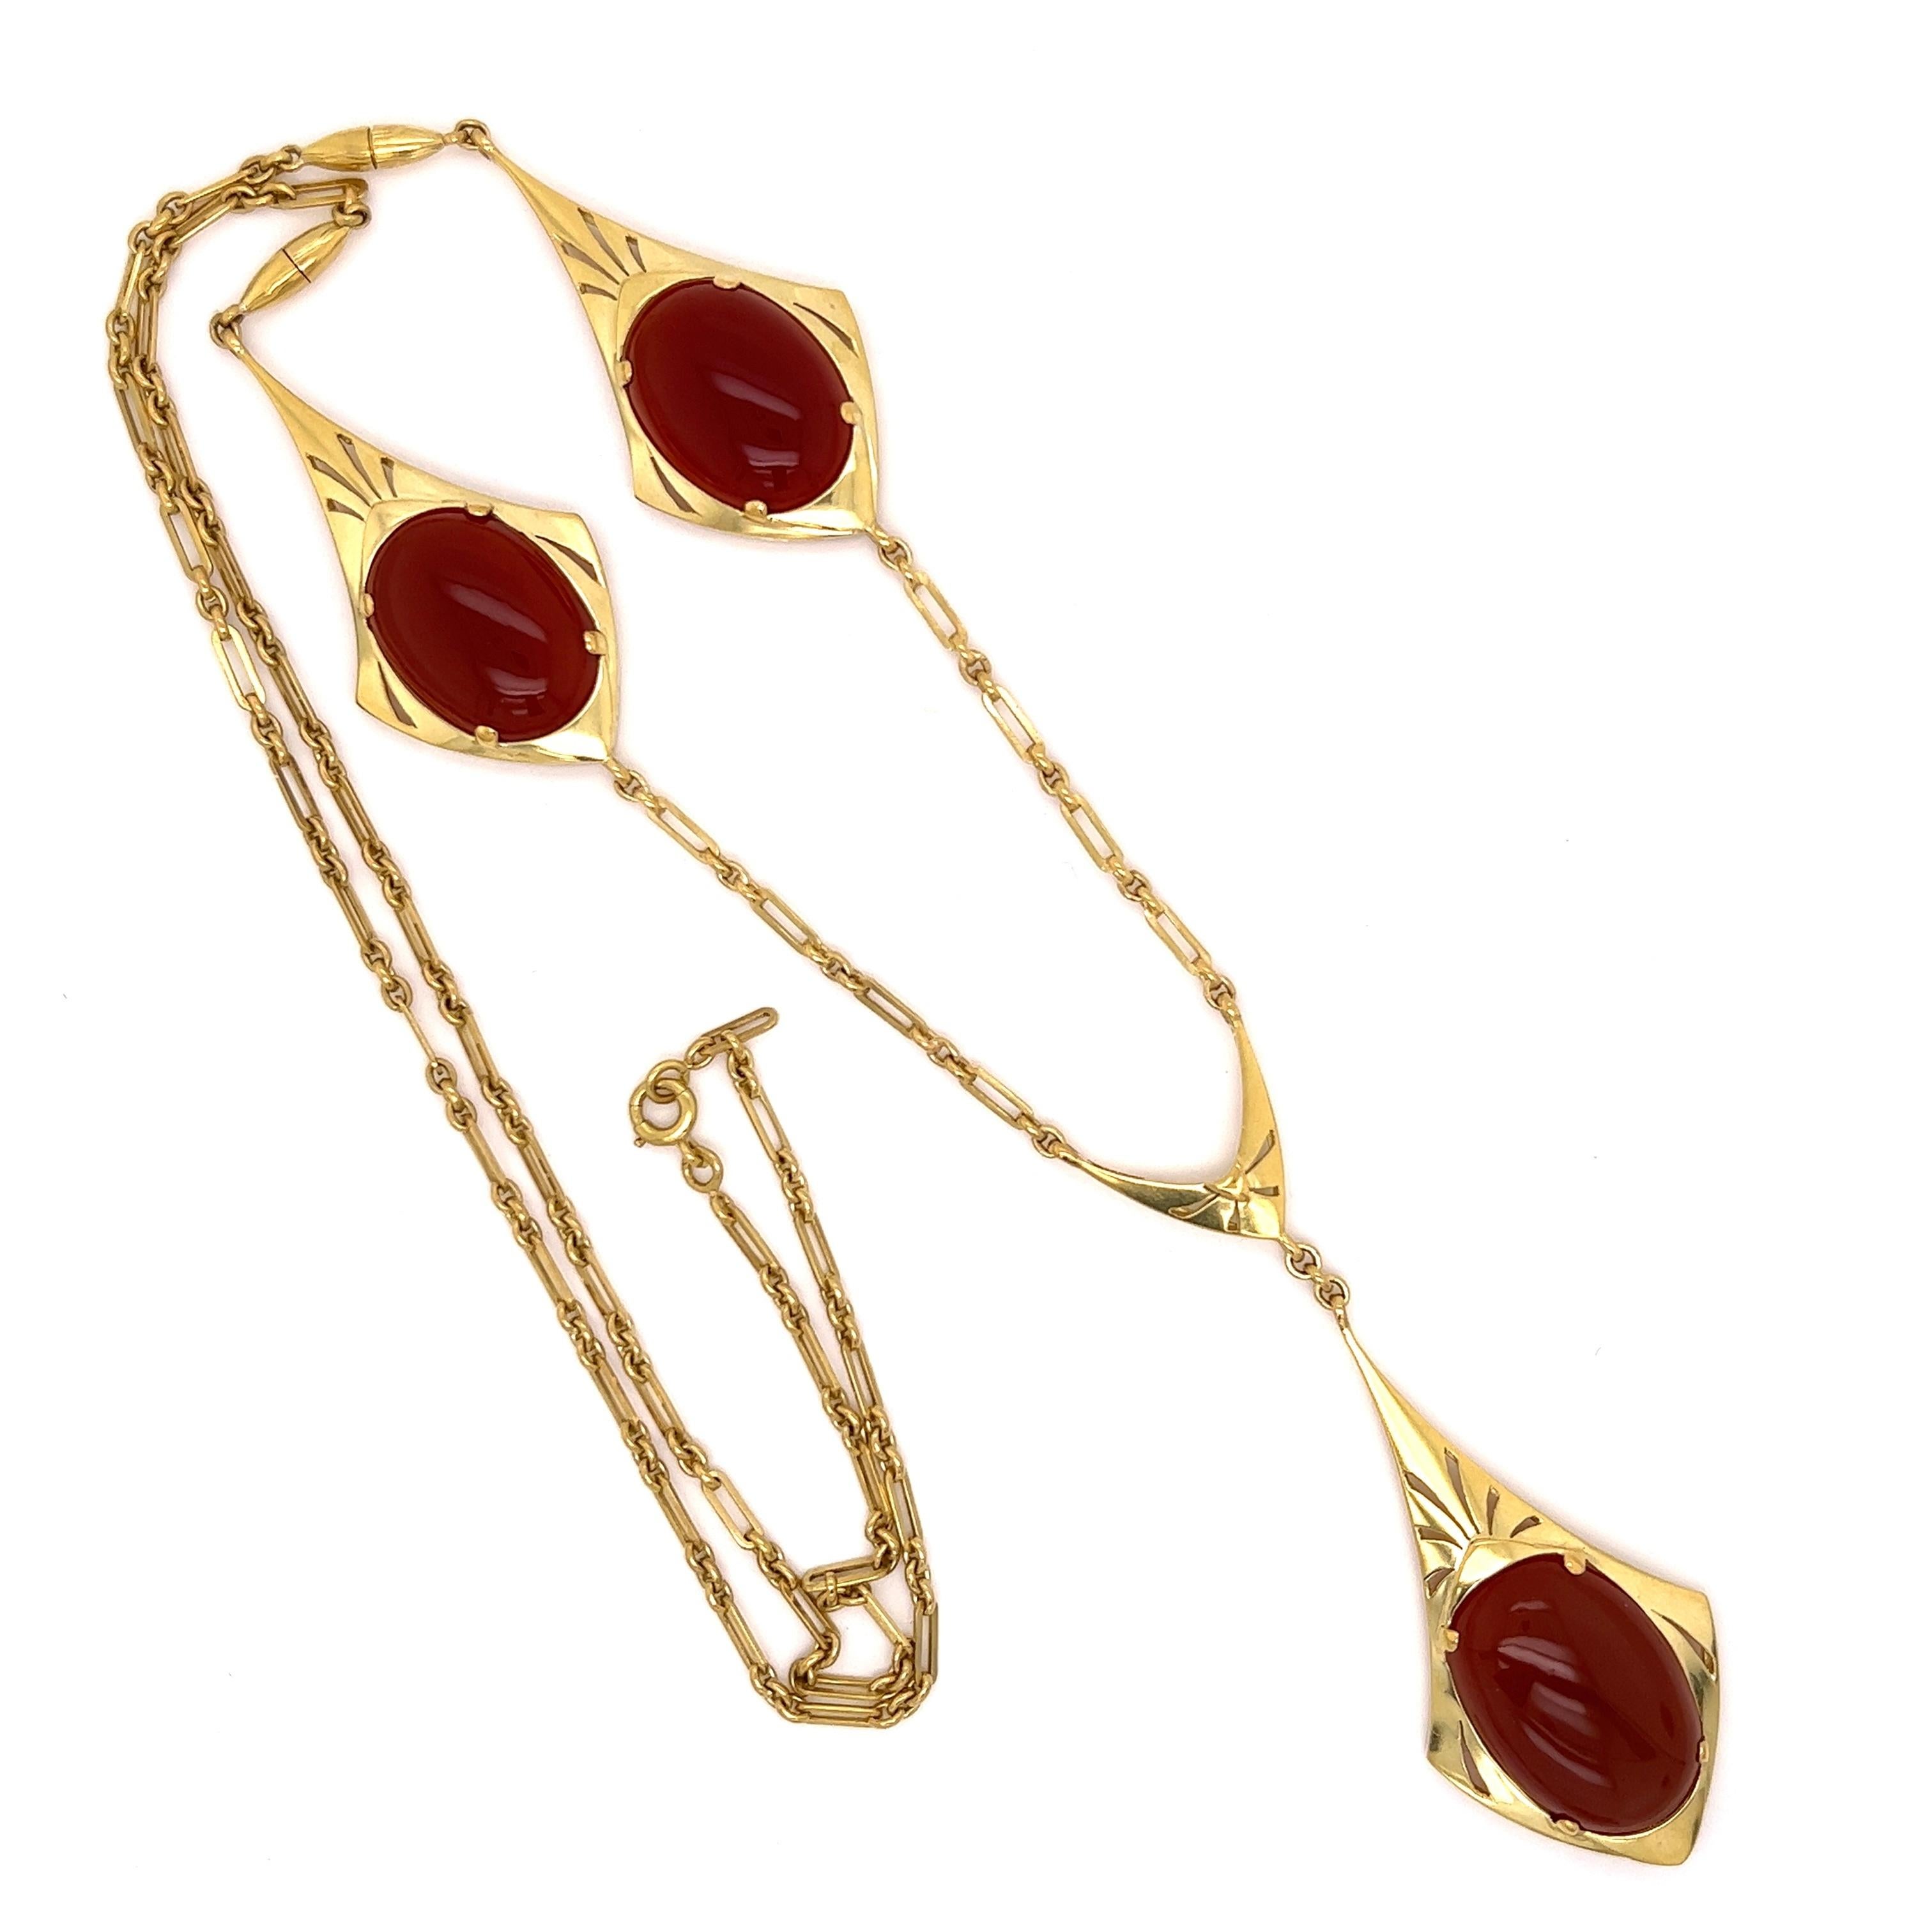 Beautiful Art Deco Triple Carnelian Drop Lavaliere Necklace. Hand set and crafted in 18K Yellow Gold. The necklace measures 28” long. More Beautiful in real time! A sure to be admired Stunning Timeless piece of fine Antique Jewelry You’ll Treasure